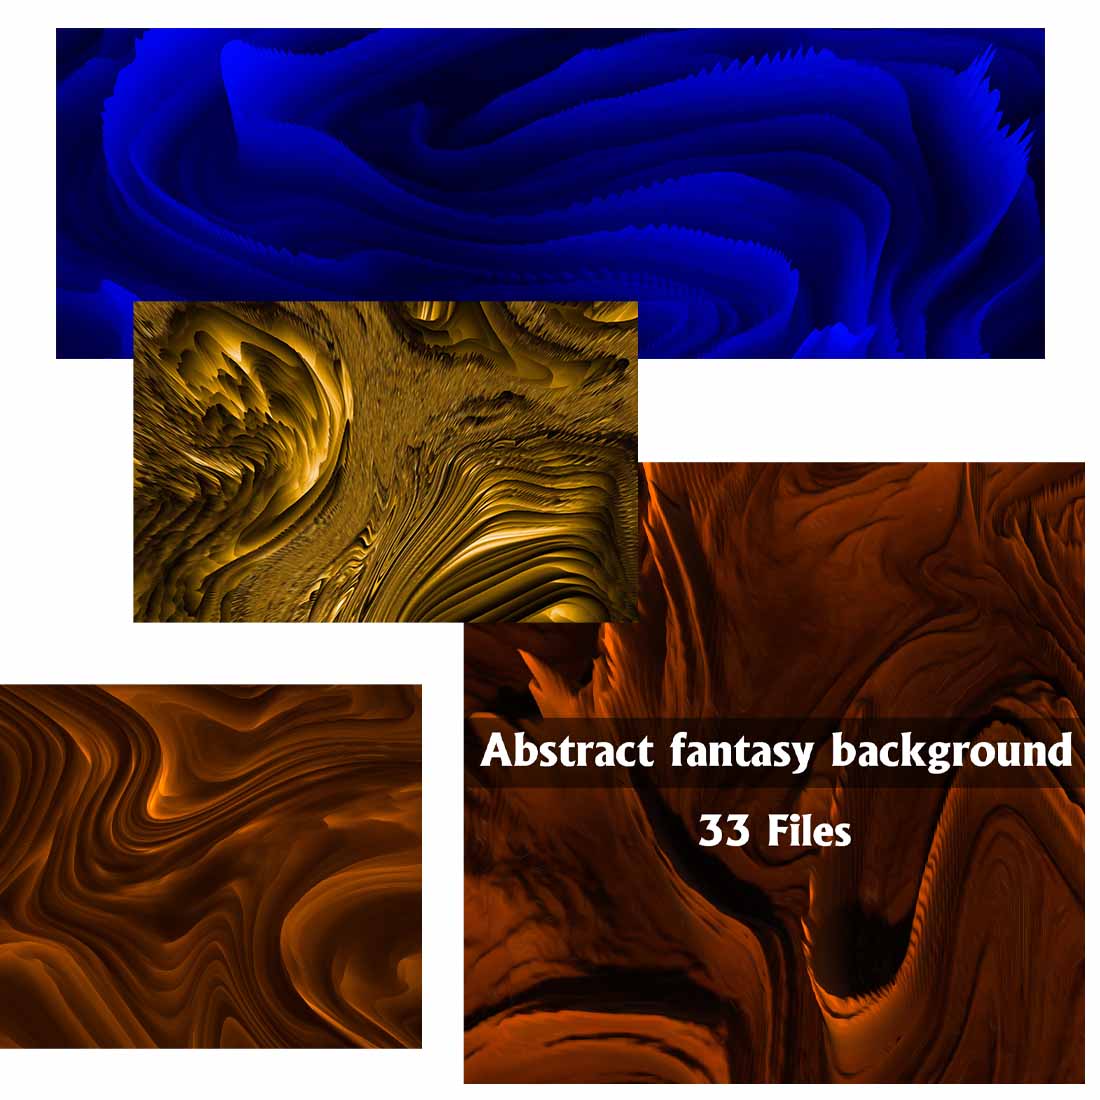 Abstract fantasy background preview image.